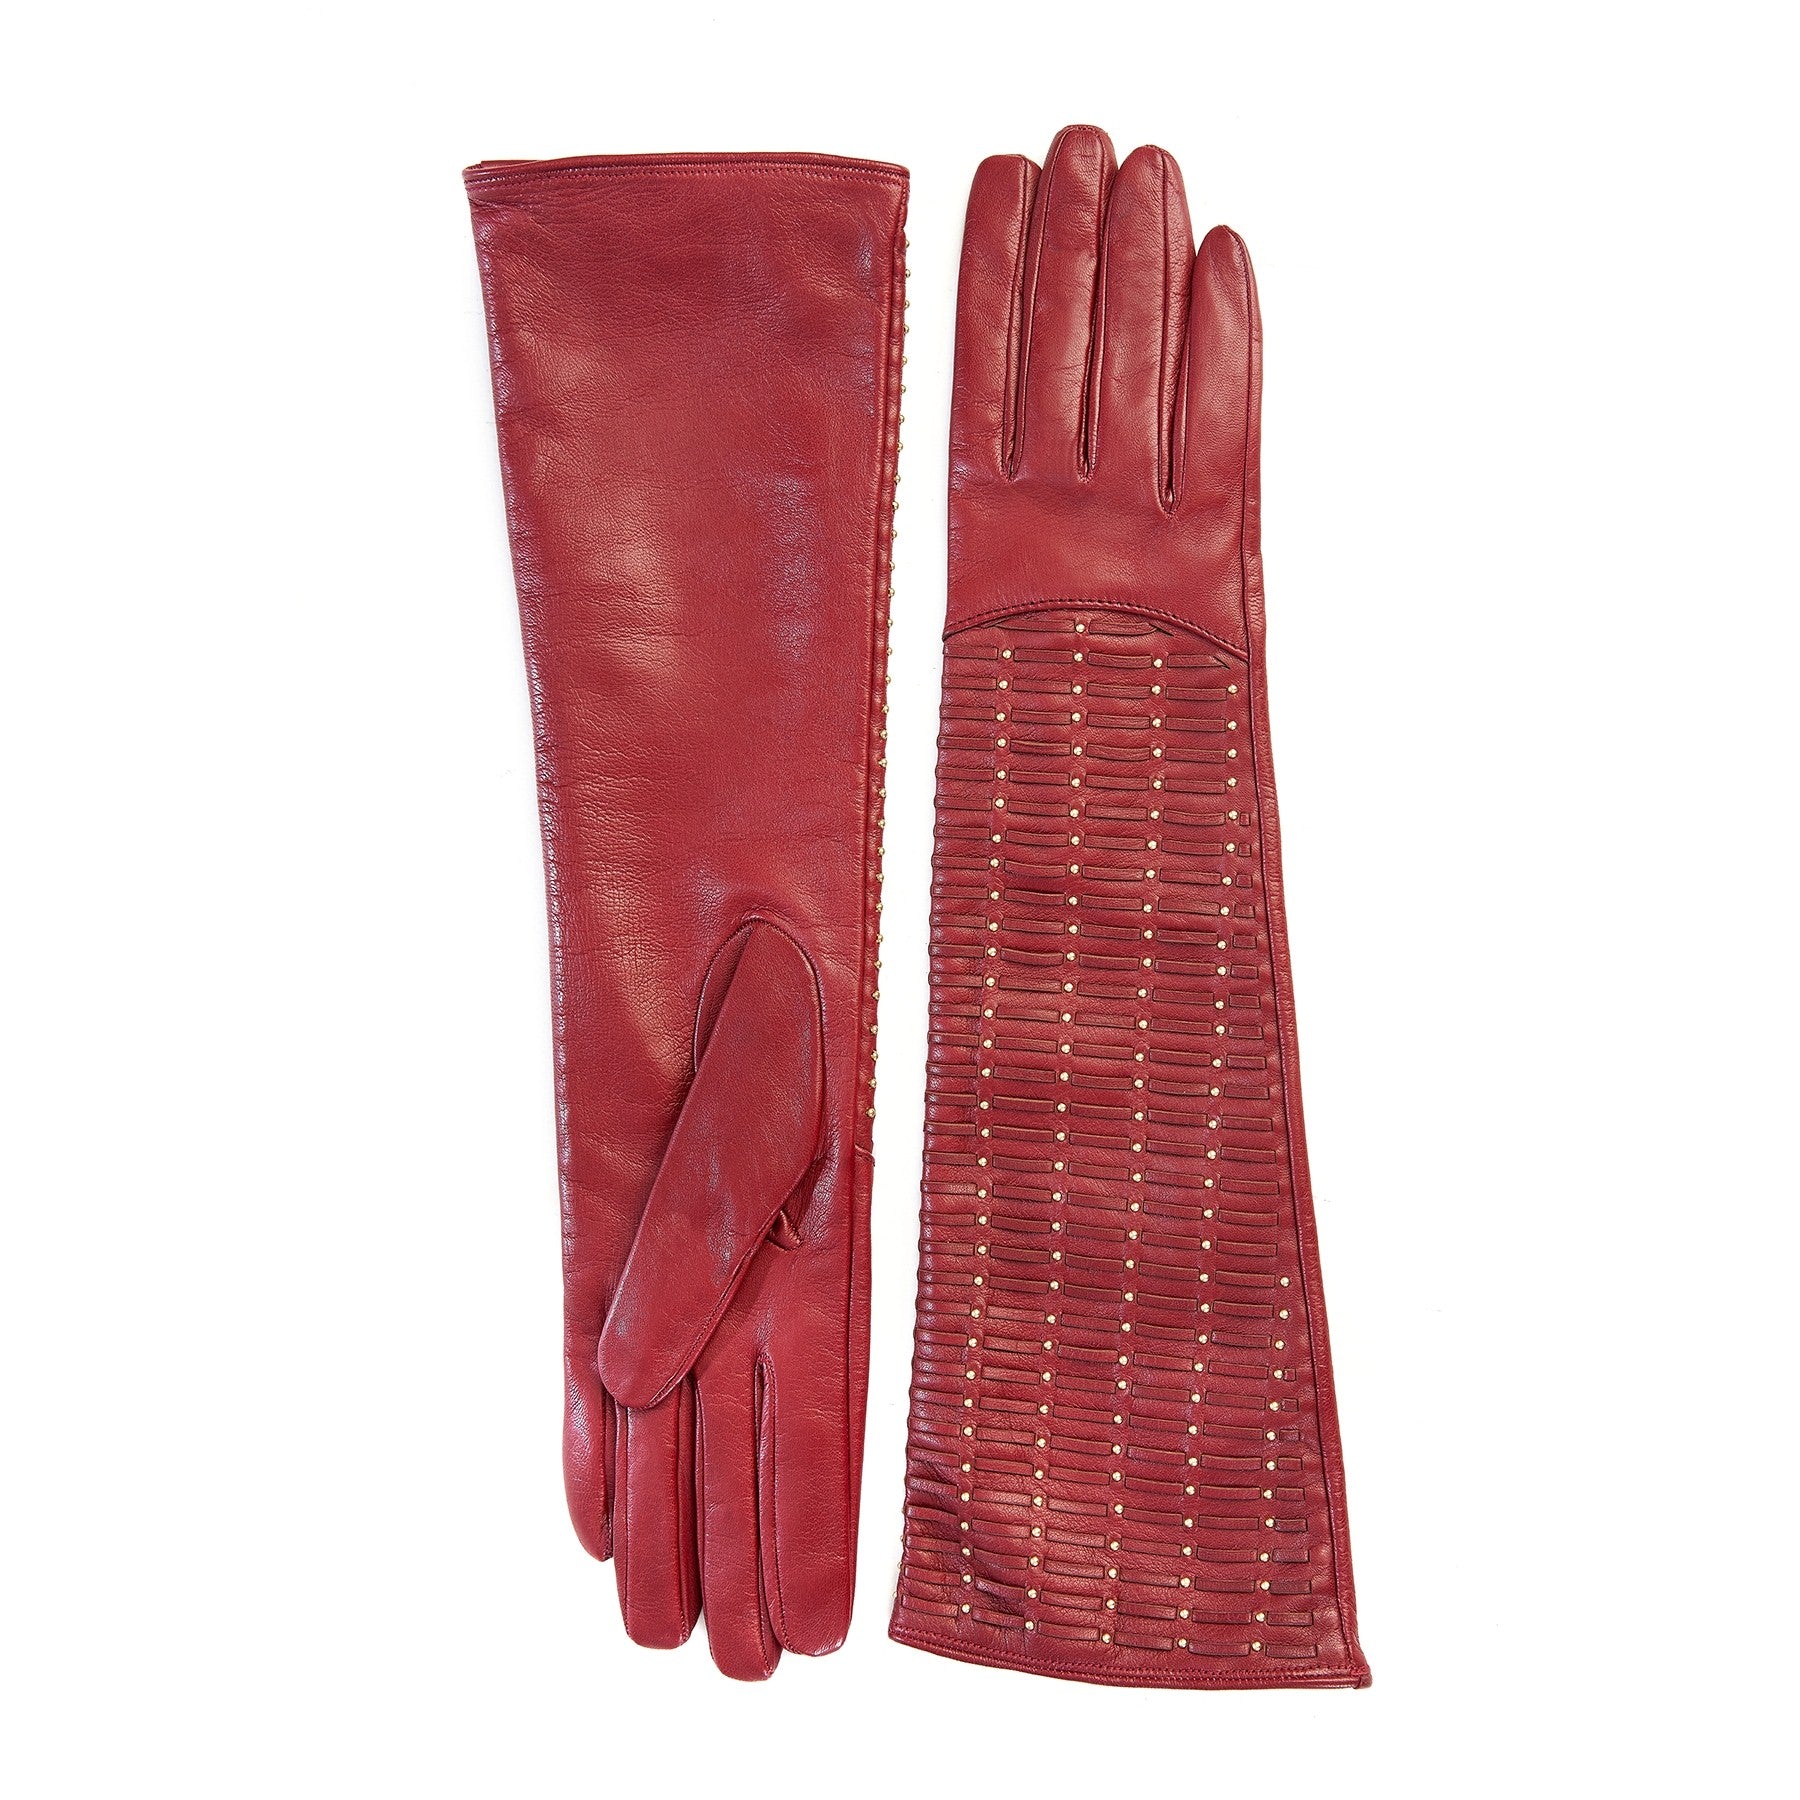 Ladies' long red leather gloves with studs and woven leather handmade